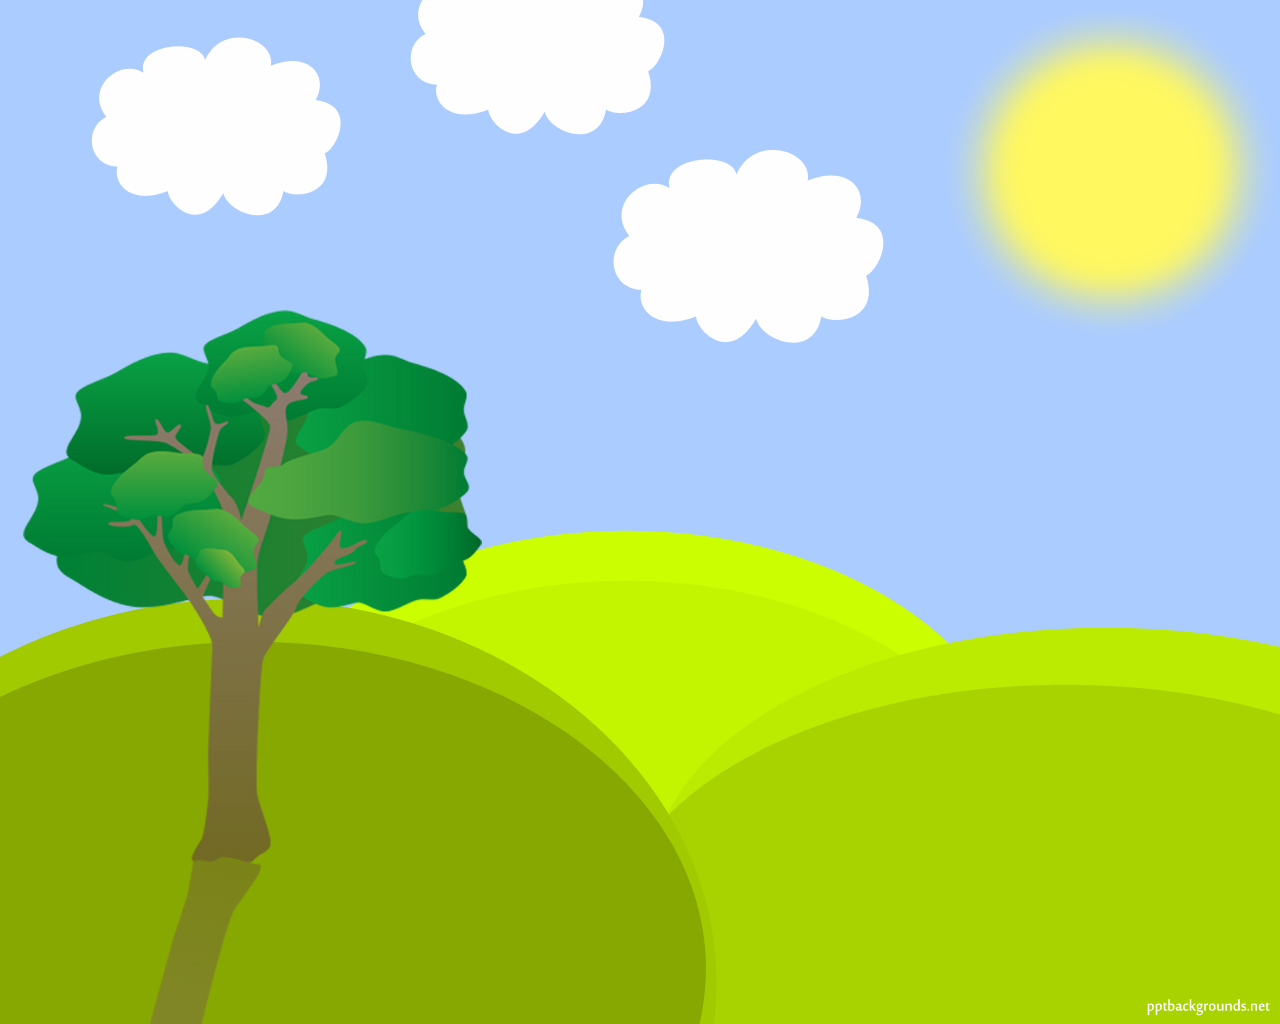 Spring Landscape Vector Background For PowerPoint - Nature ...